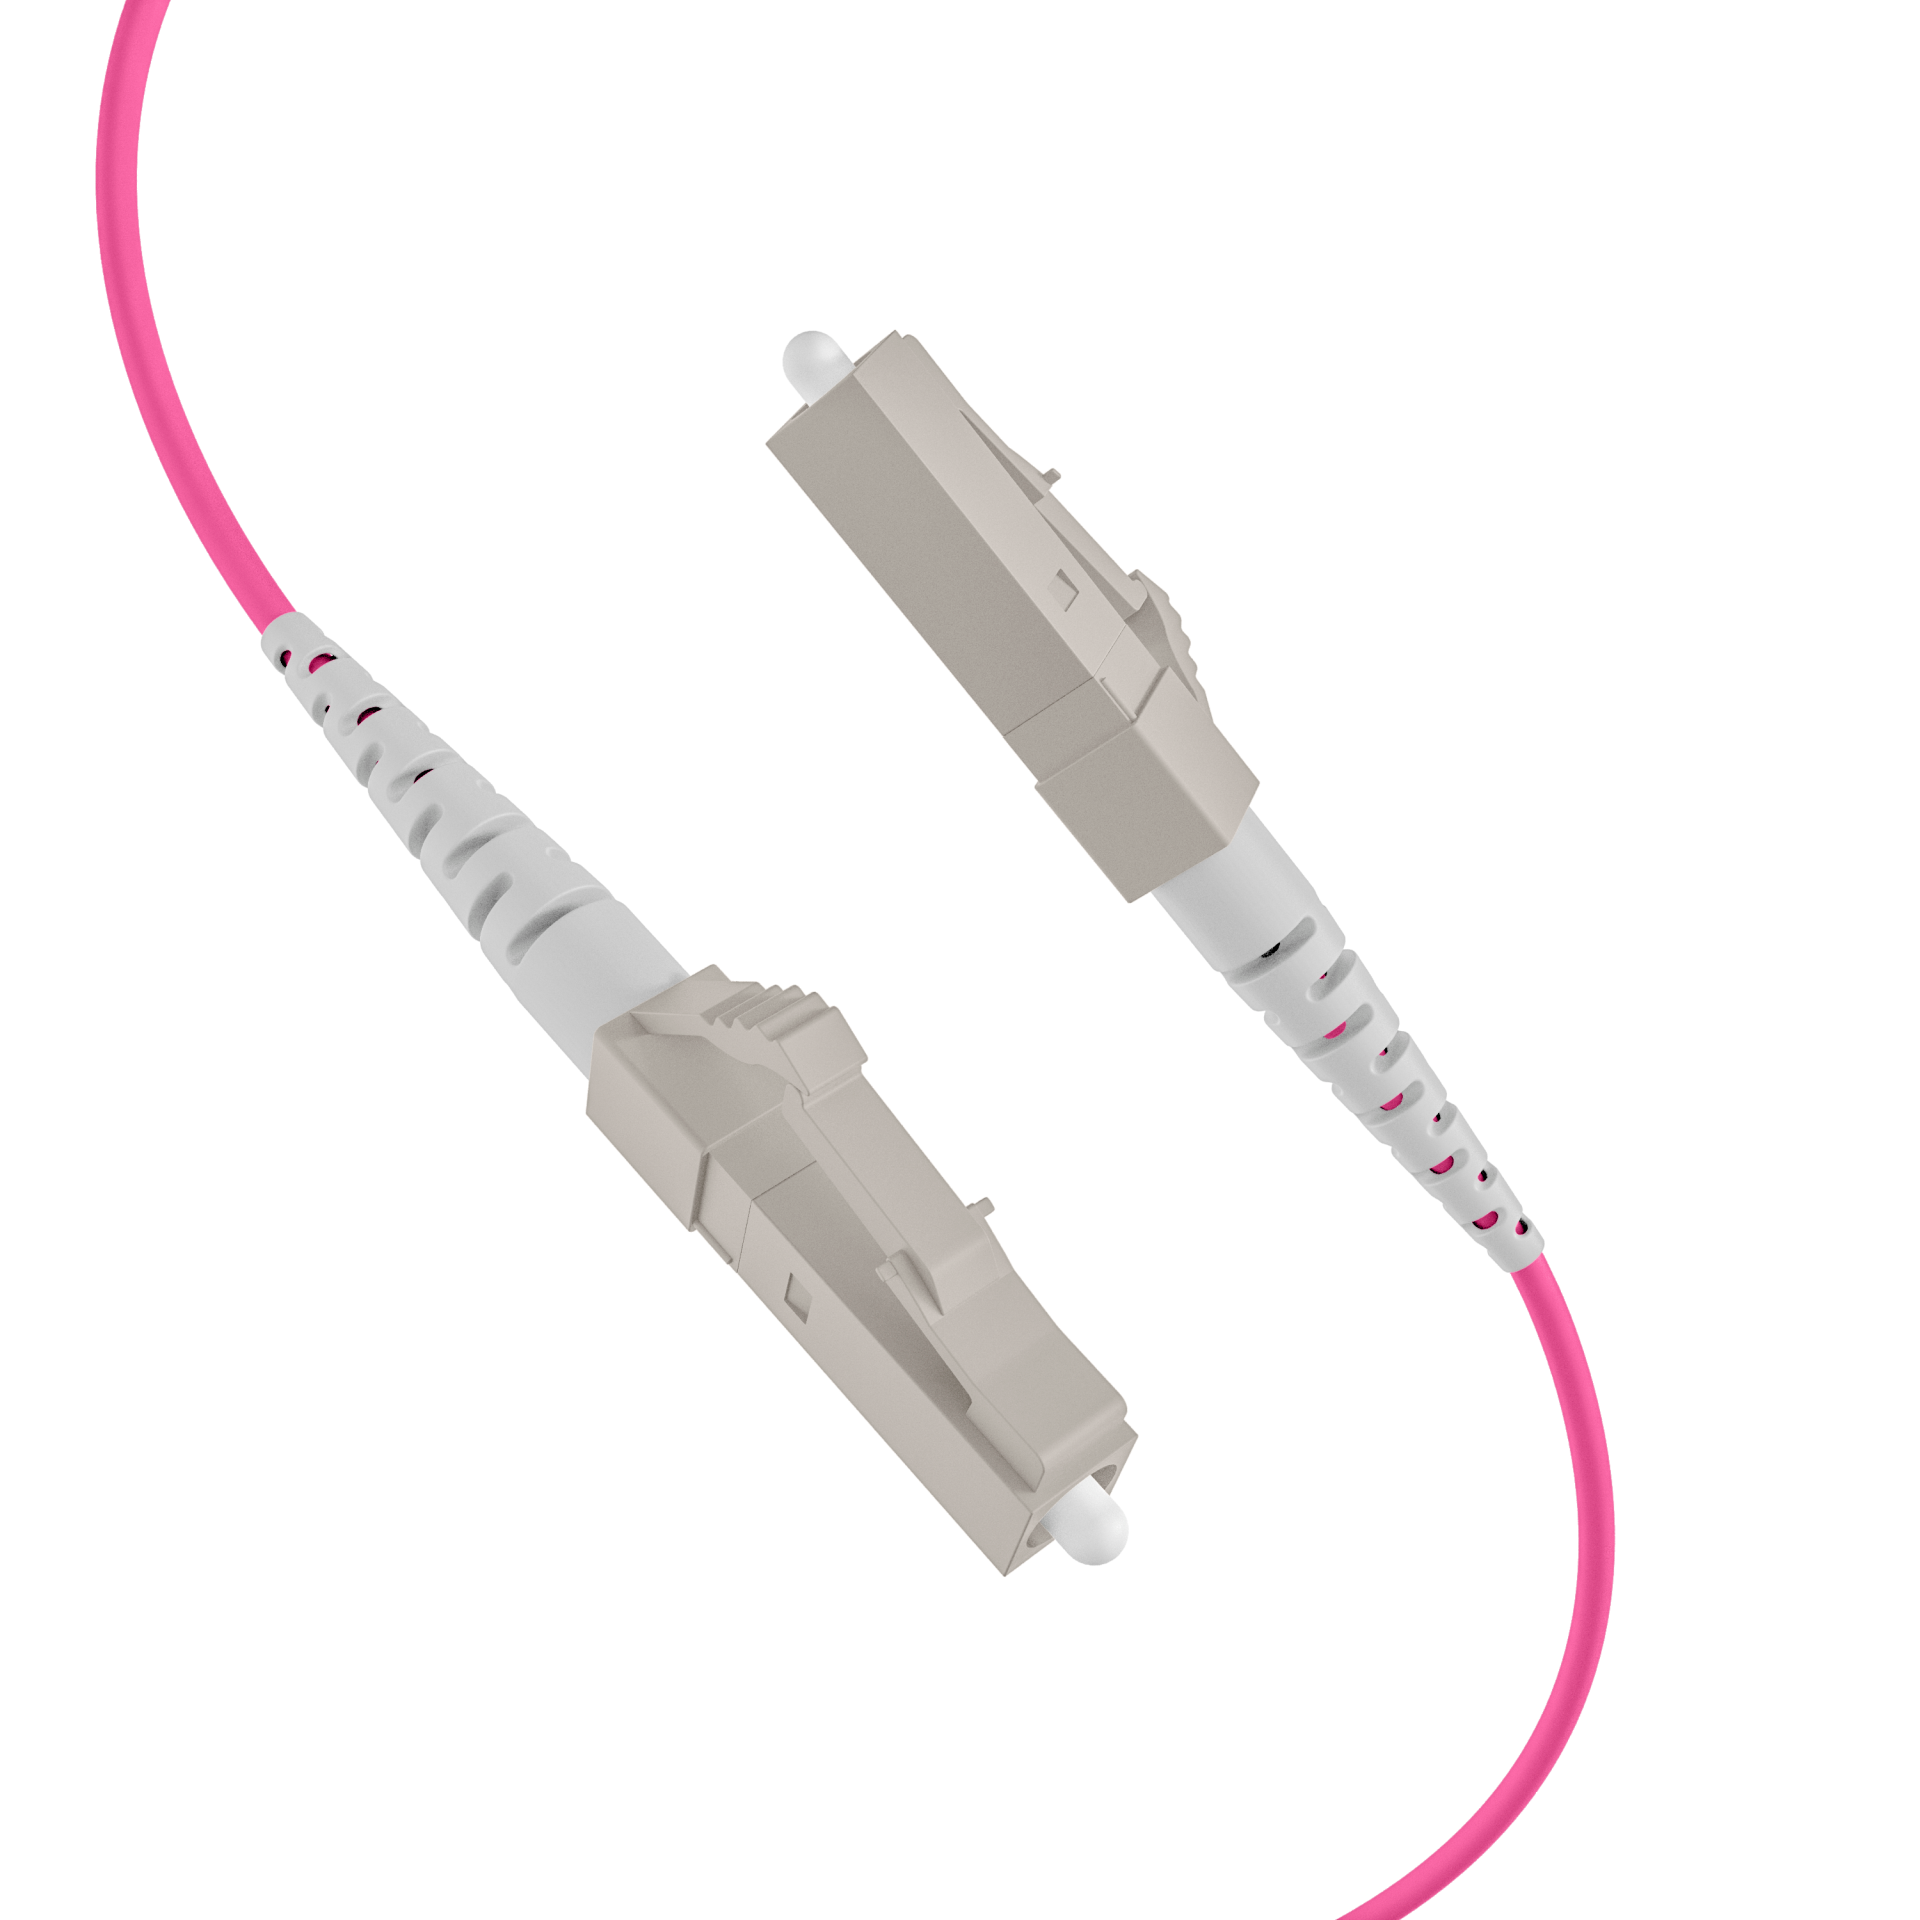 Trunkcable U-DQ(ZN)BH OM4 12G (1x12) LC-LC,170m Dca LSZH